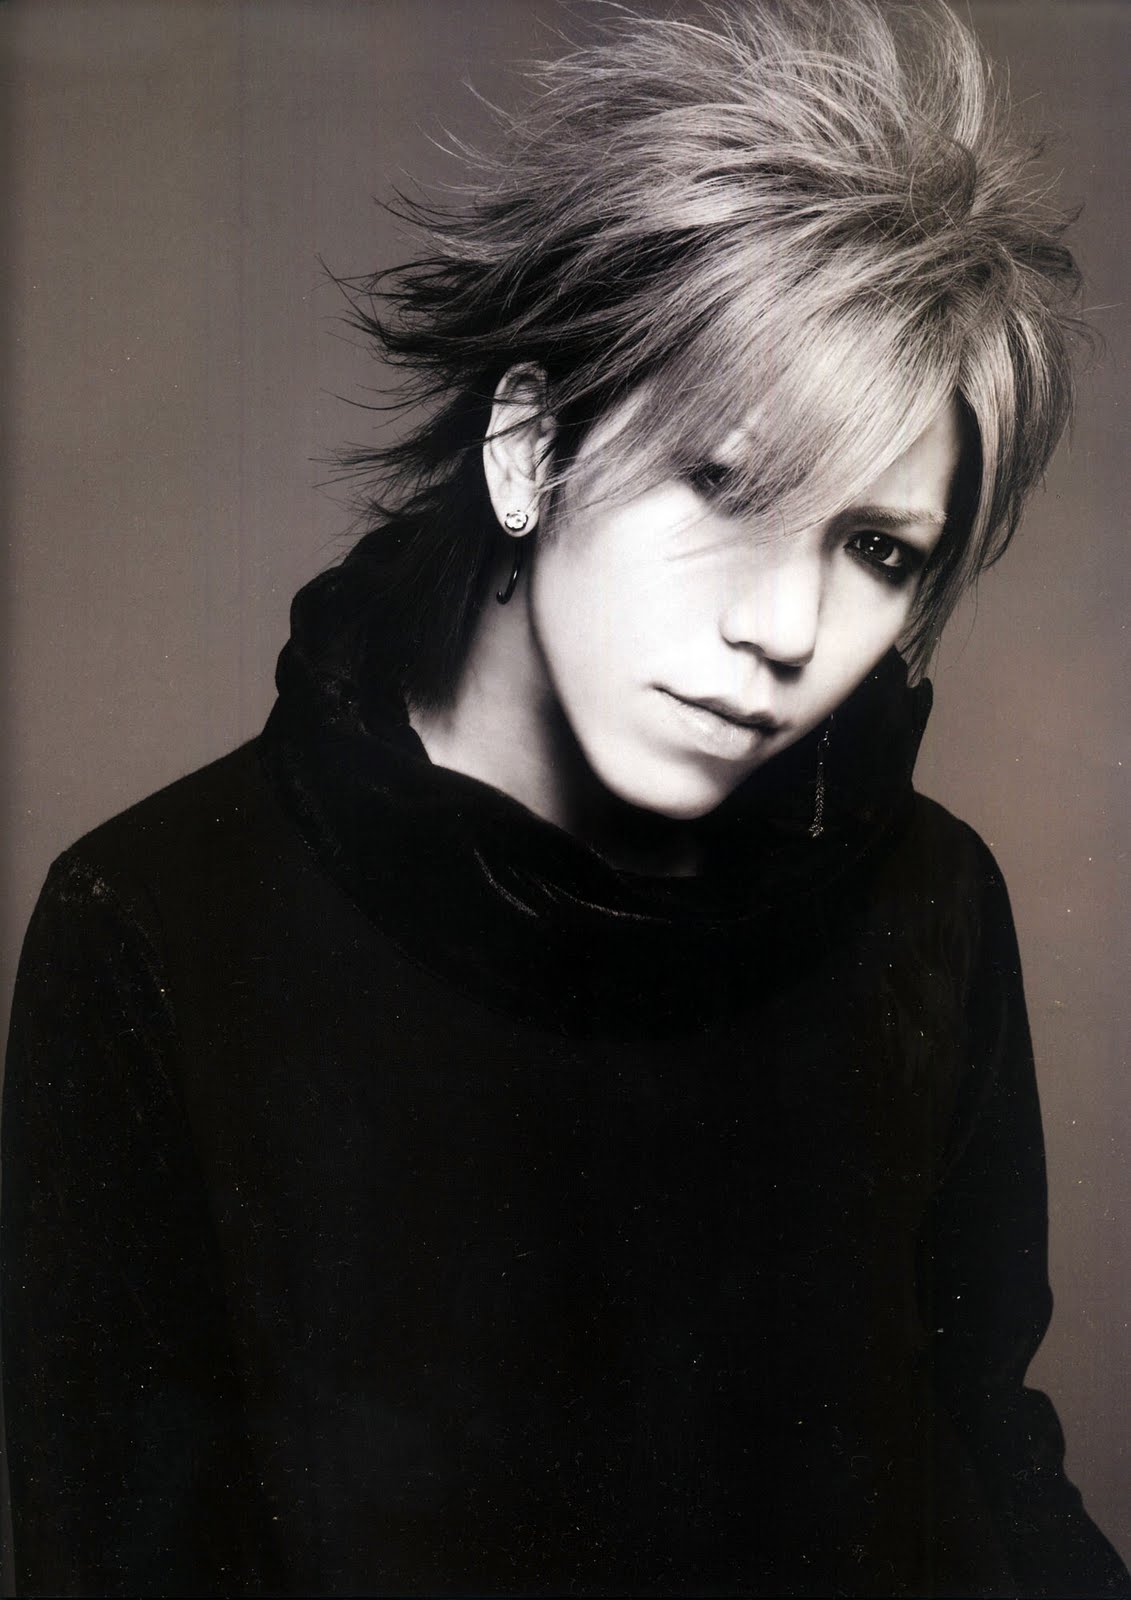 Aoi (葵) is a member of the visual kei rock band, the GazettE. 